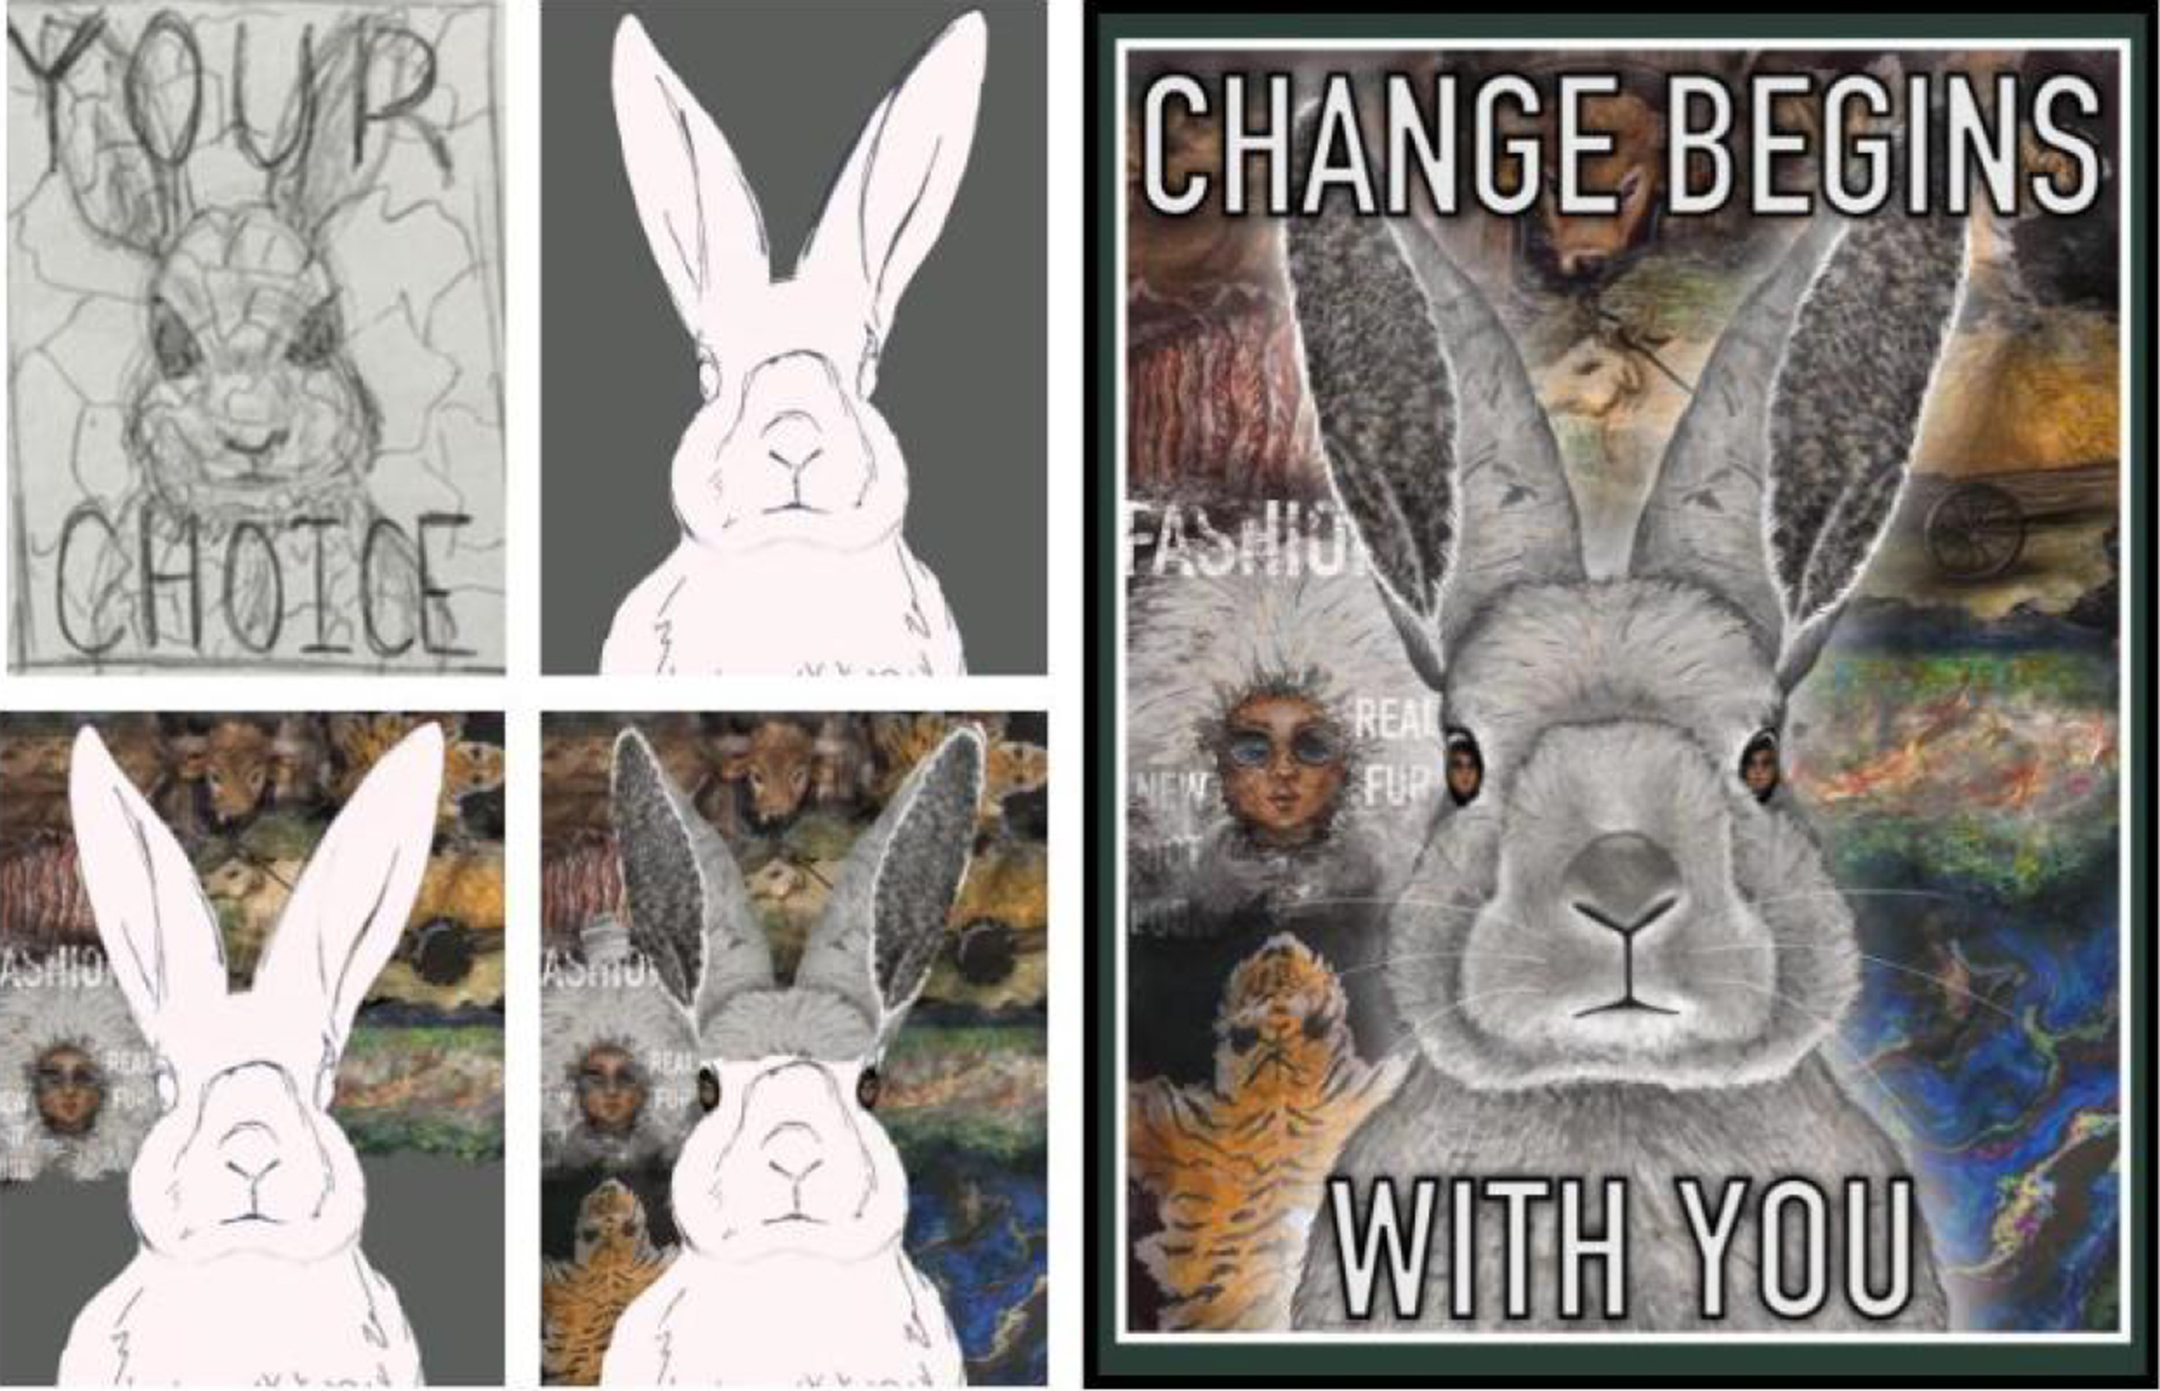 poster of an angry looking white rabbit with the words “change begins with you” on the right, with a grid of four process images on the left